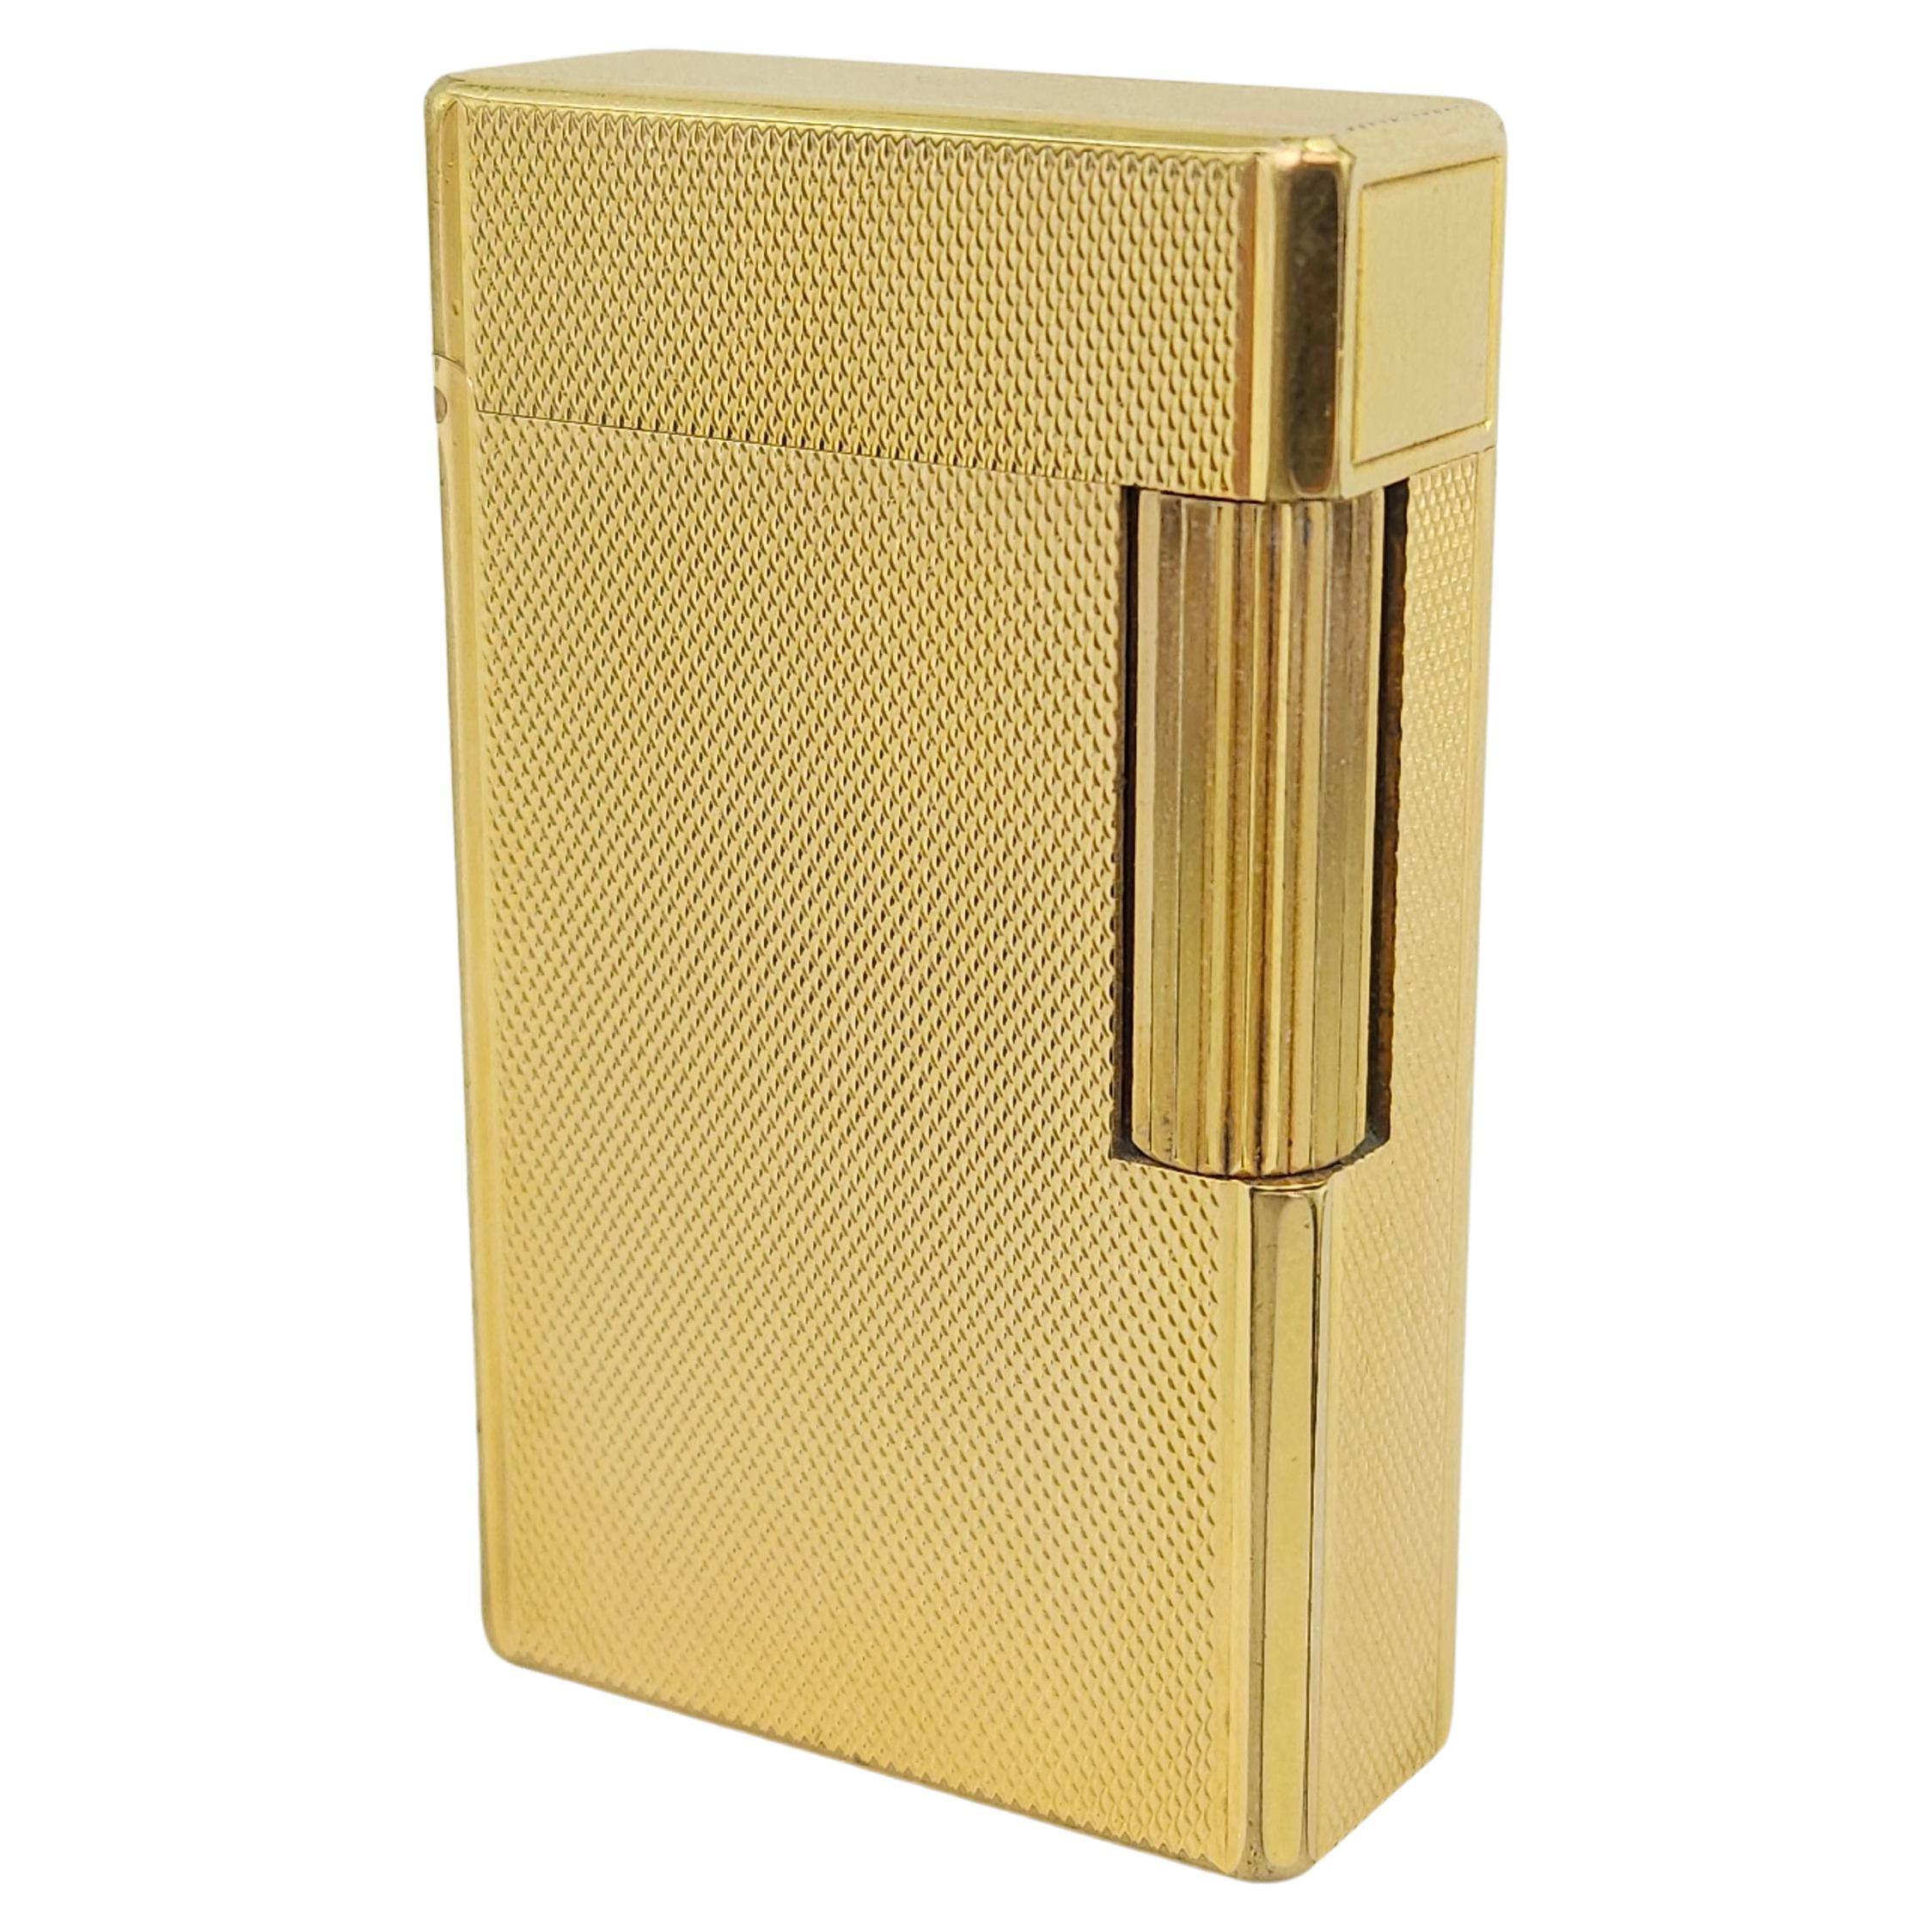 Vintage Gold-Plated Gas Lighter By S. T. Dupont, Paris